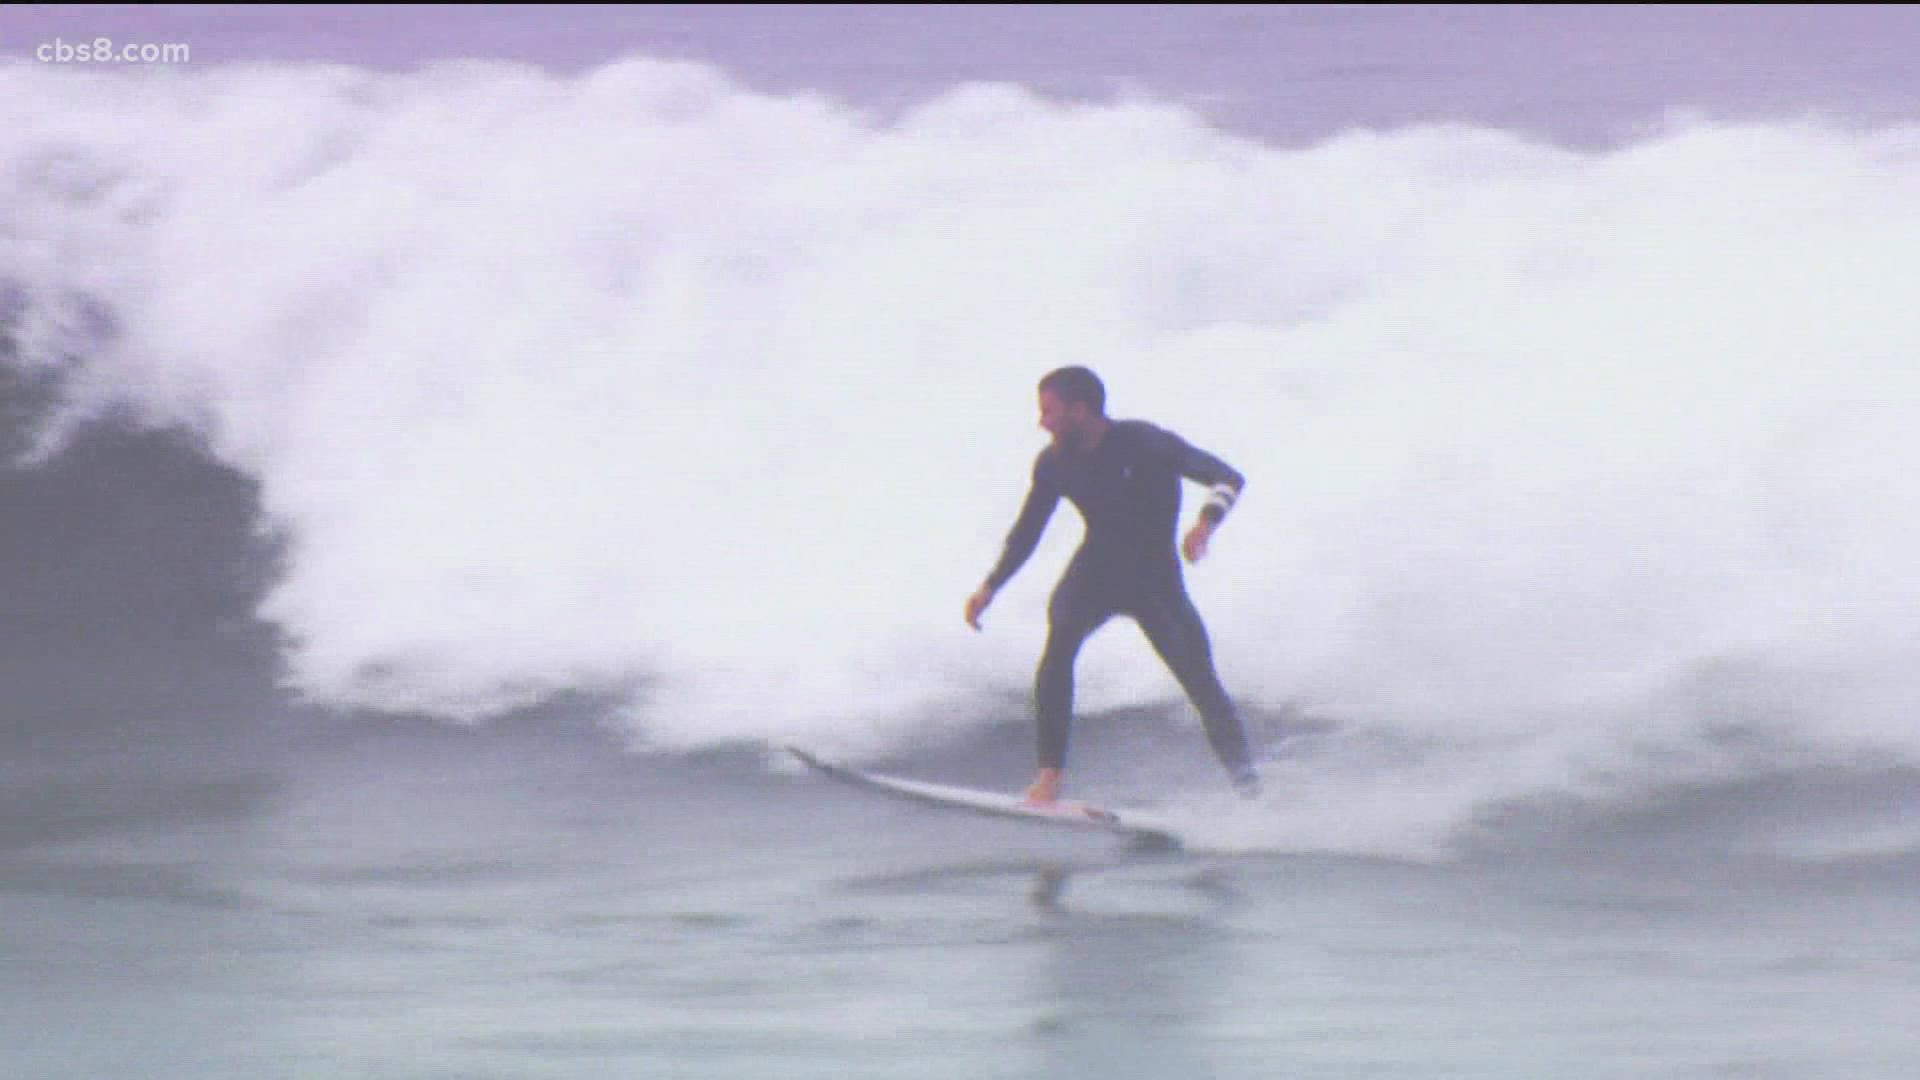 The best Surfer in the world are at Trestles Beach in northern San Diego County for the World Championship.